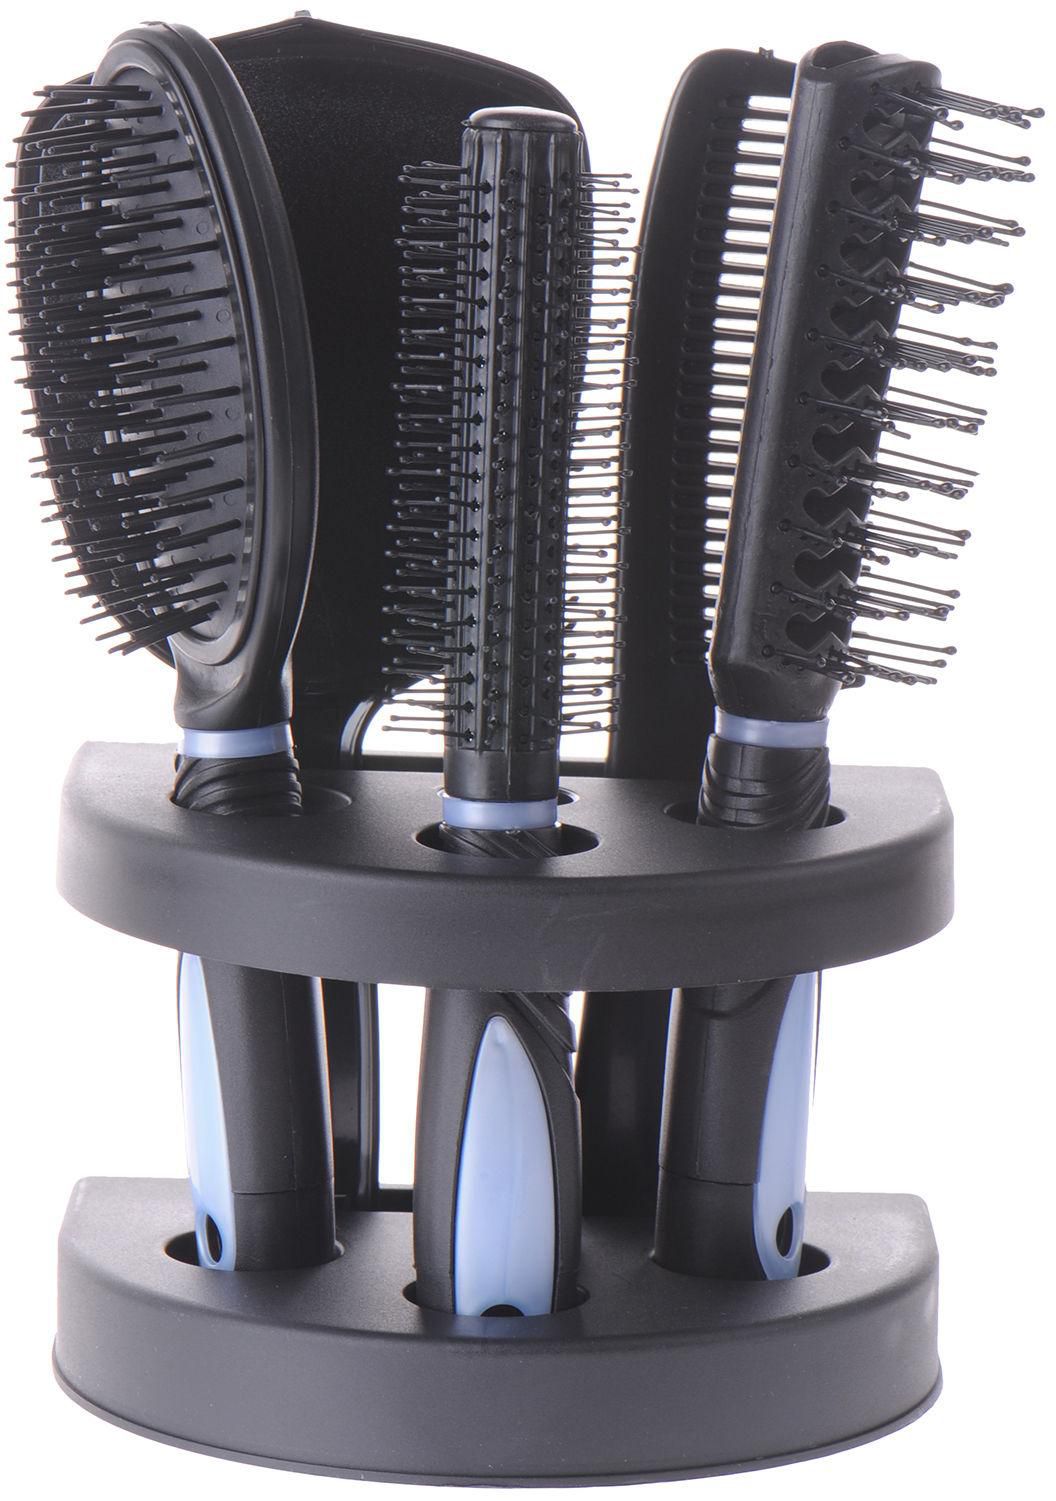 6-In-1 Women Salon Hair Styling Brush Massage Comb Set with Stand Holder (4 Colors)